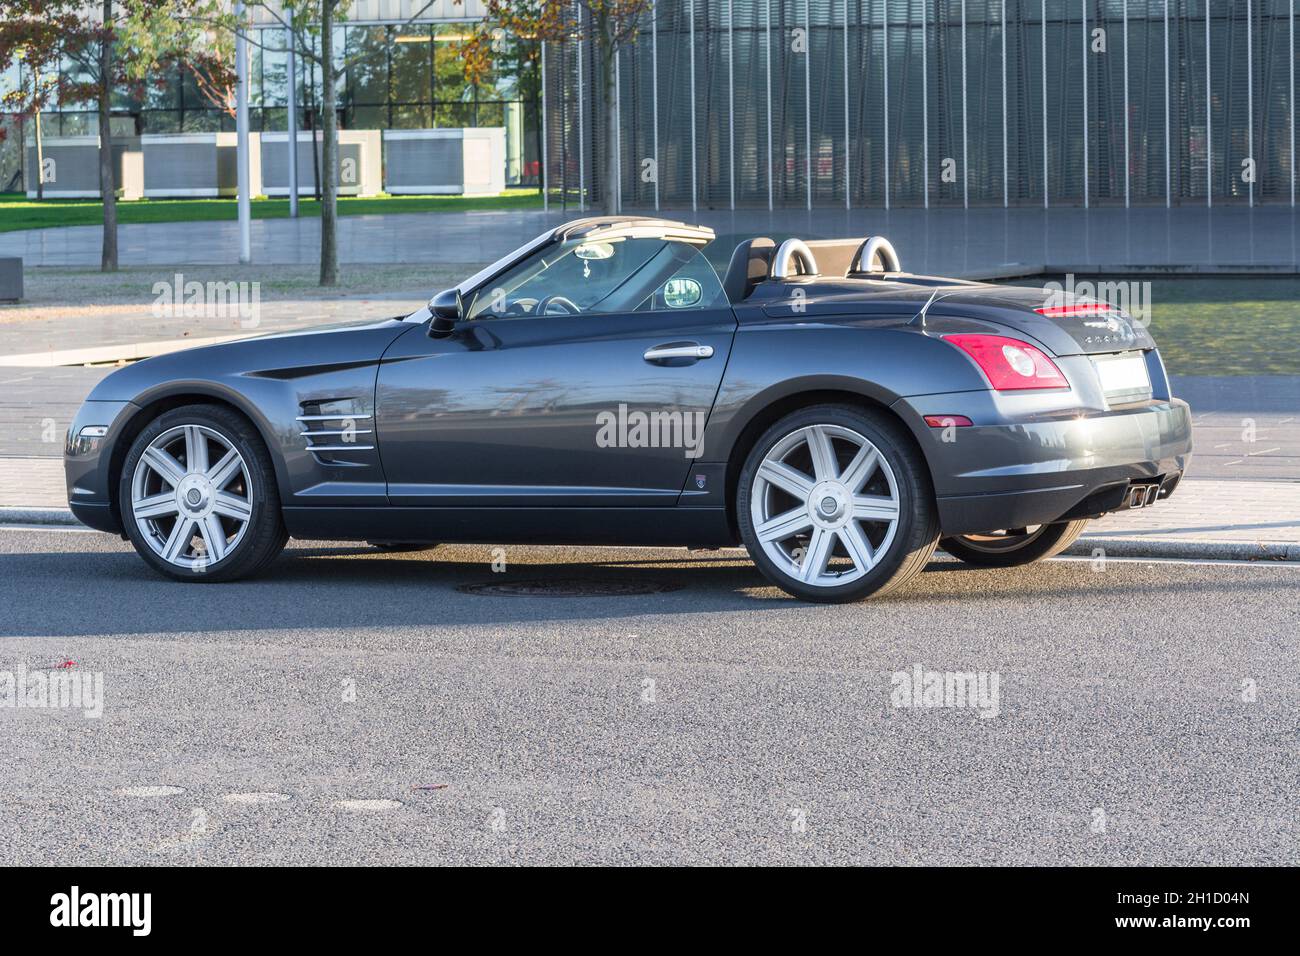 ESSEN, NRW, GERMANY - OCTOBER 11, 2015: Chrysler Crossfire, side view of the new administrative building of ThyssenKrupp in Essen, Germany. Stock Photo